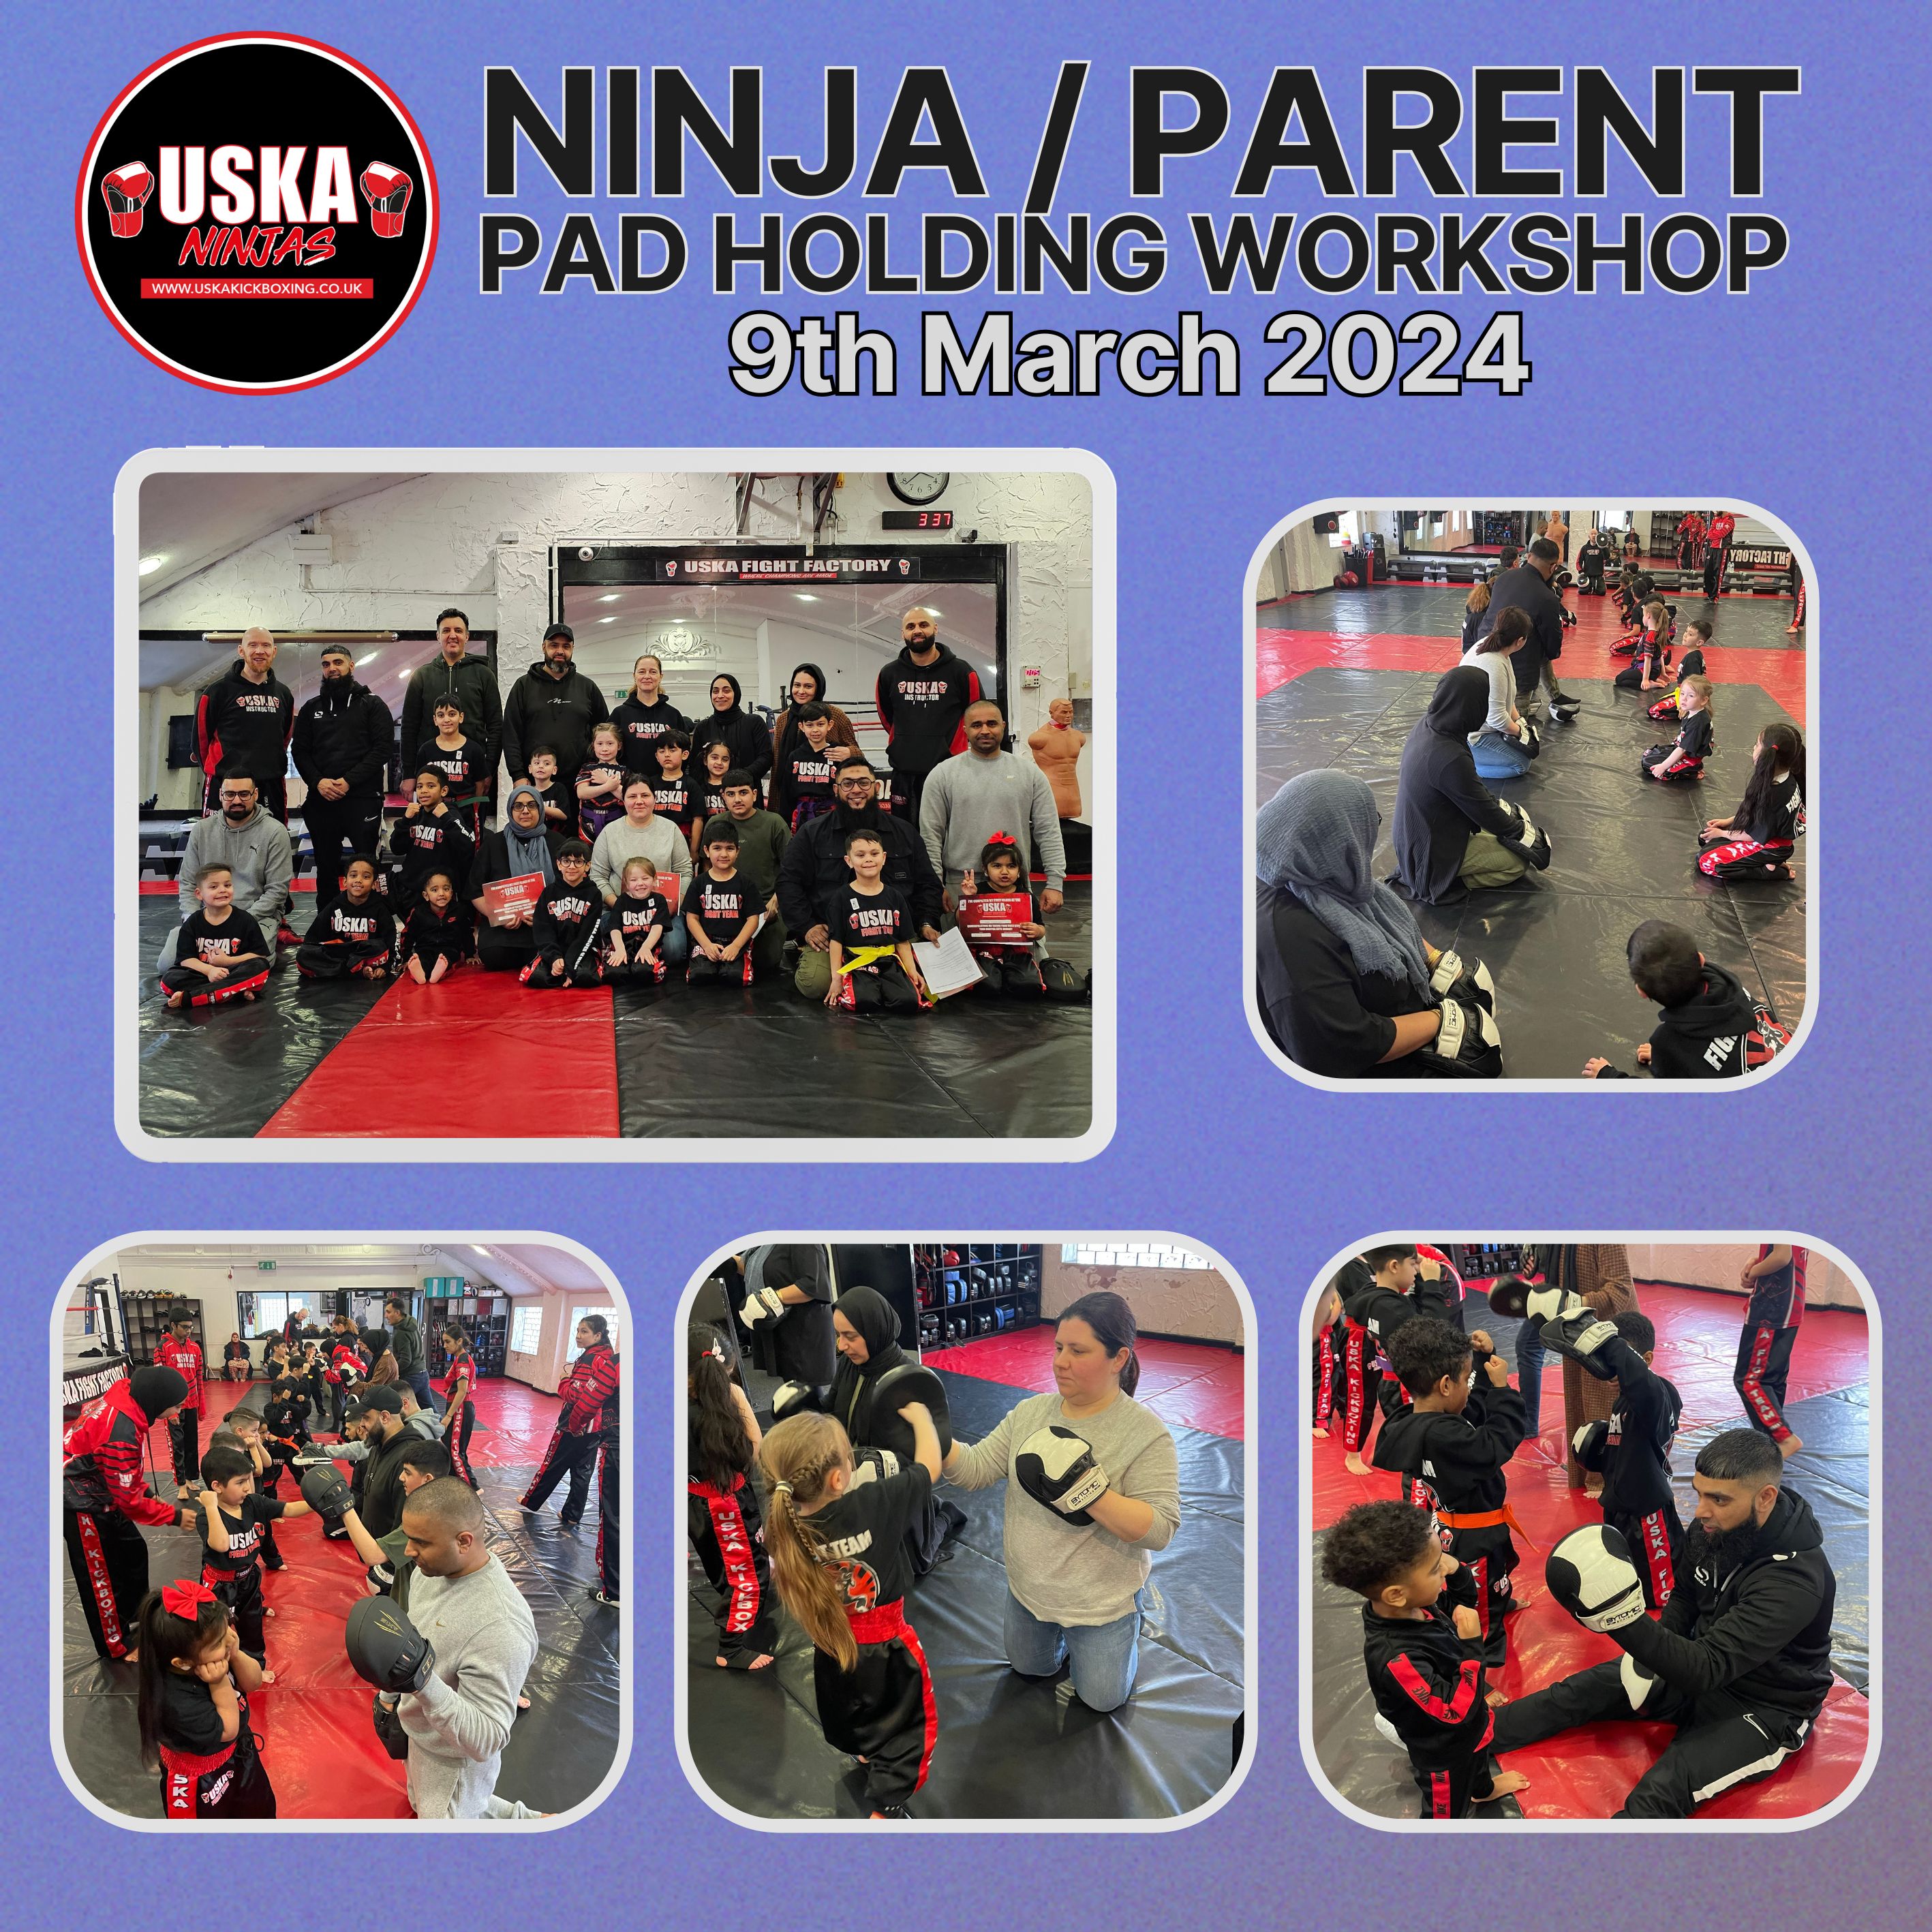 09-03-24 - Great success with our Inaugural Ninja's / Parents Pad Holding Workshop!